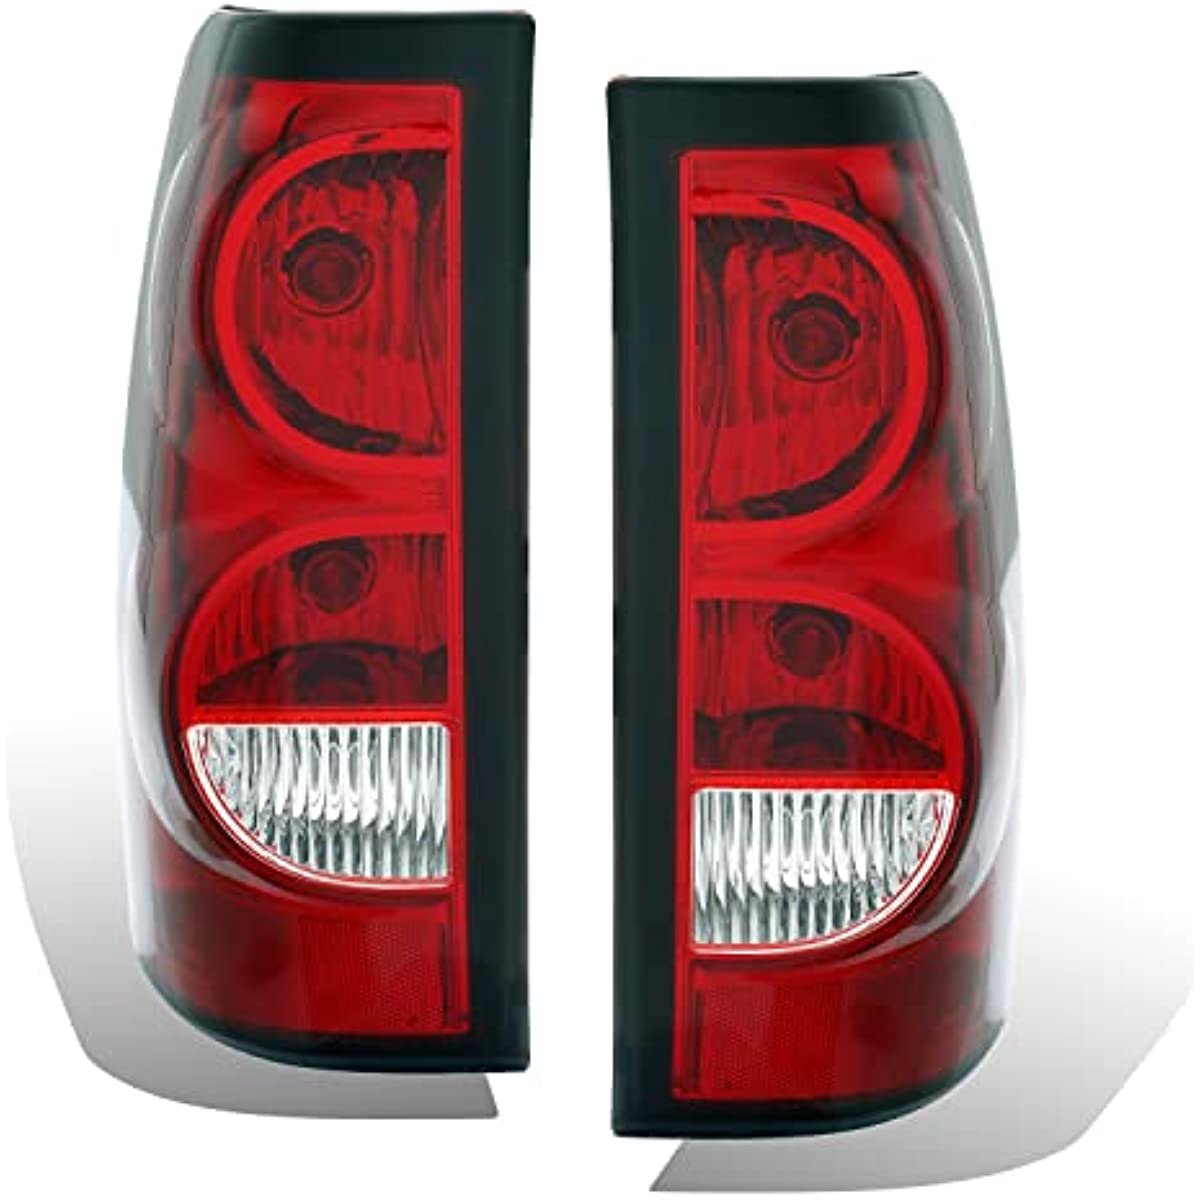 2003-2006 Chevy Silverado OE Style Ruby Red Taillights w/Bulb and Harness Set